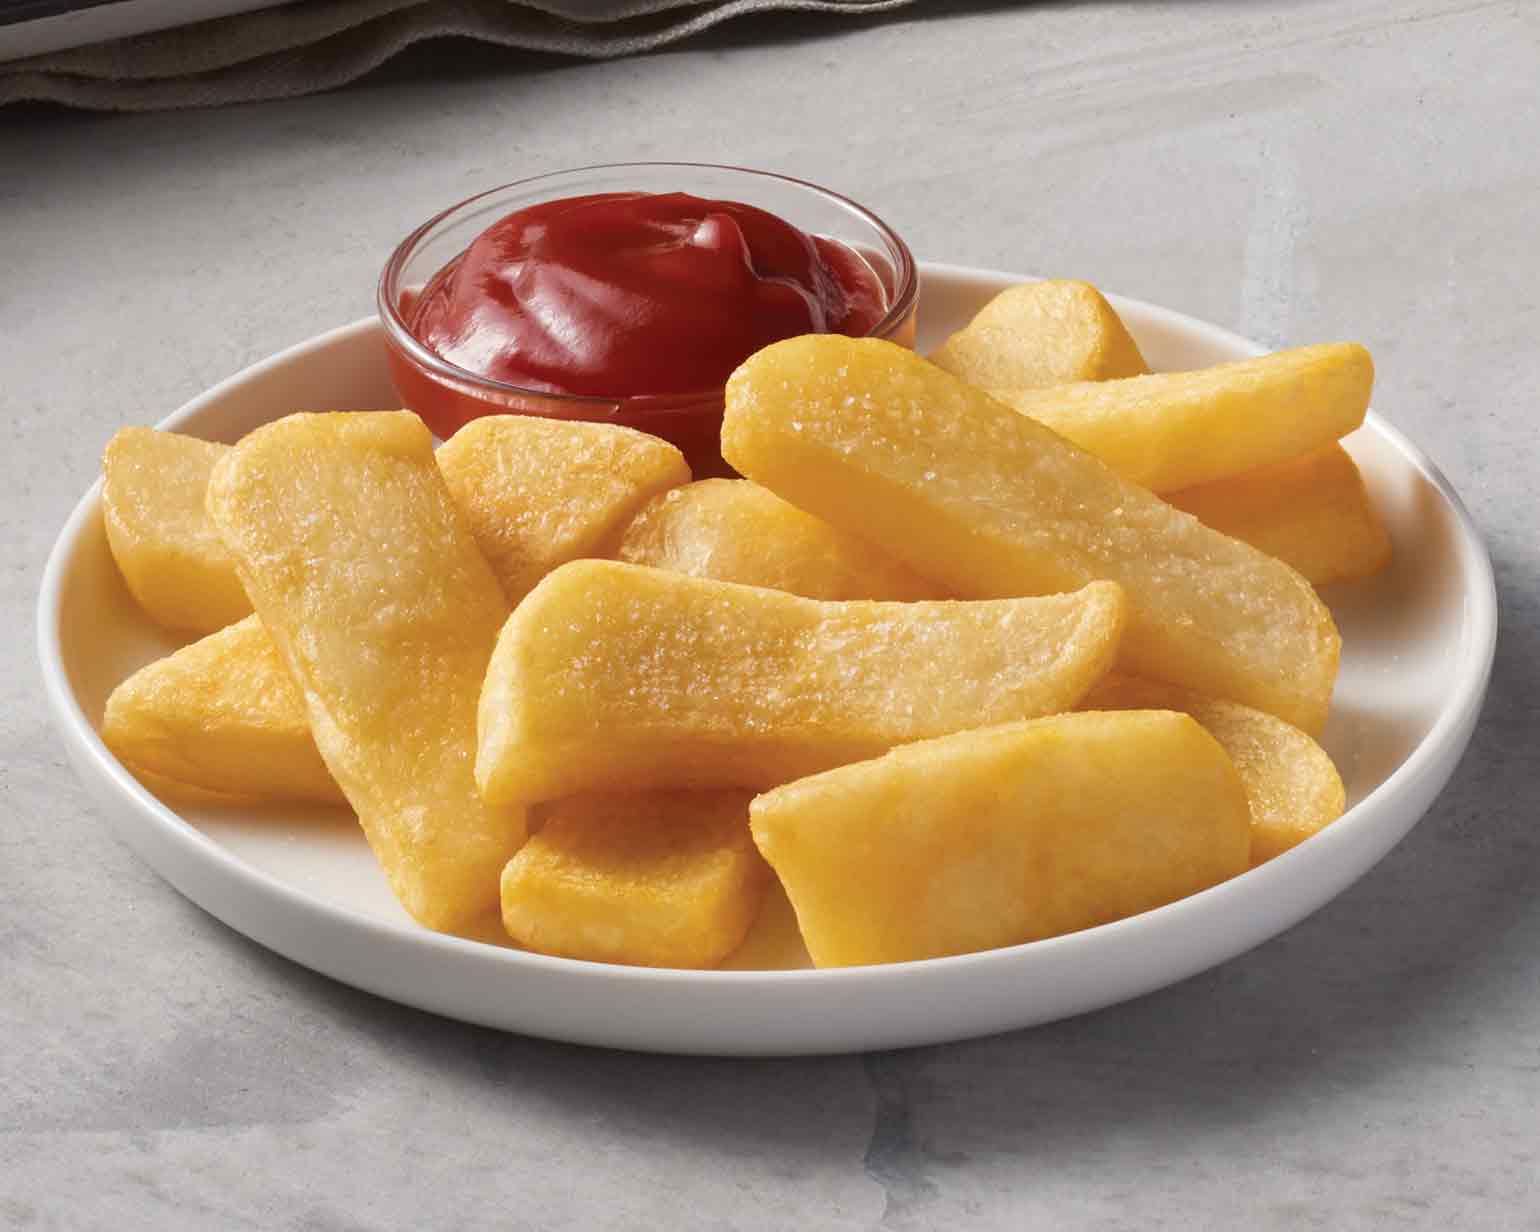 Signature Select Potatoes French Fried Crinkle Cut - 32 Oz